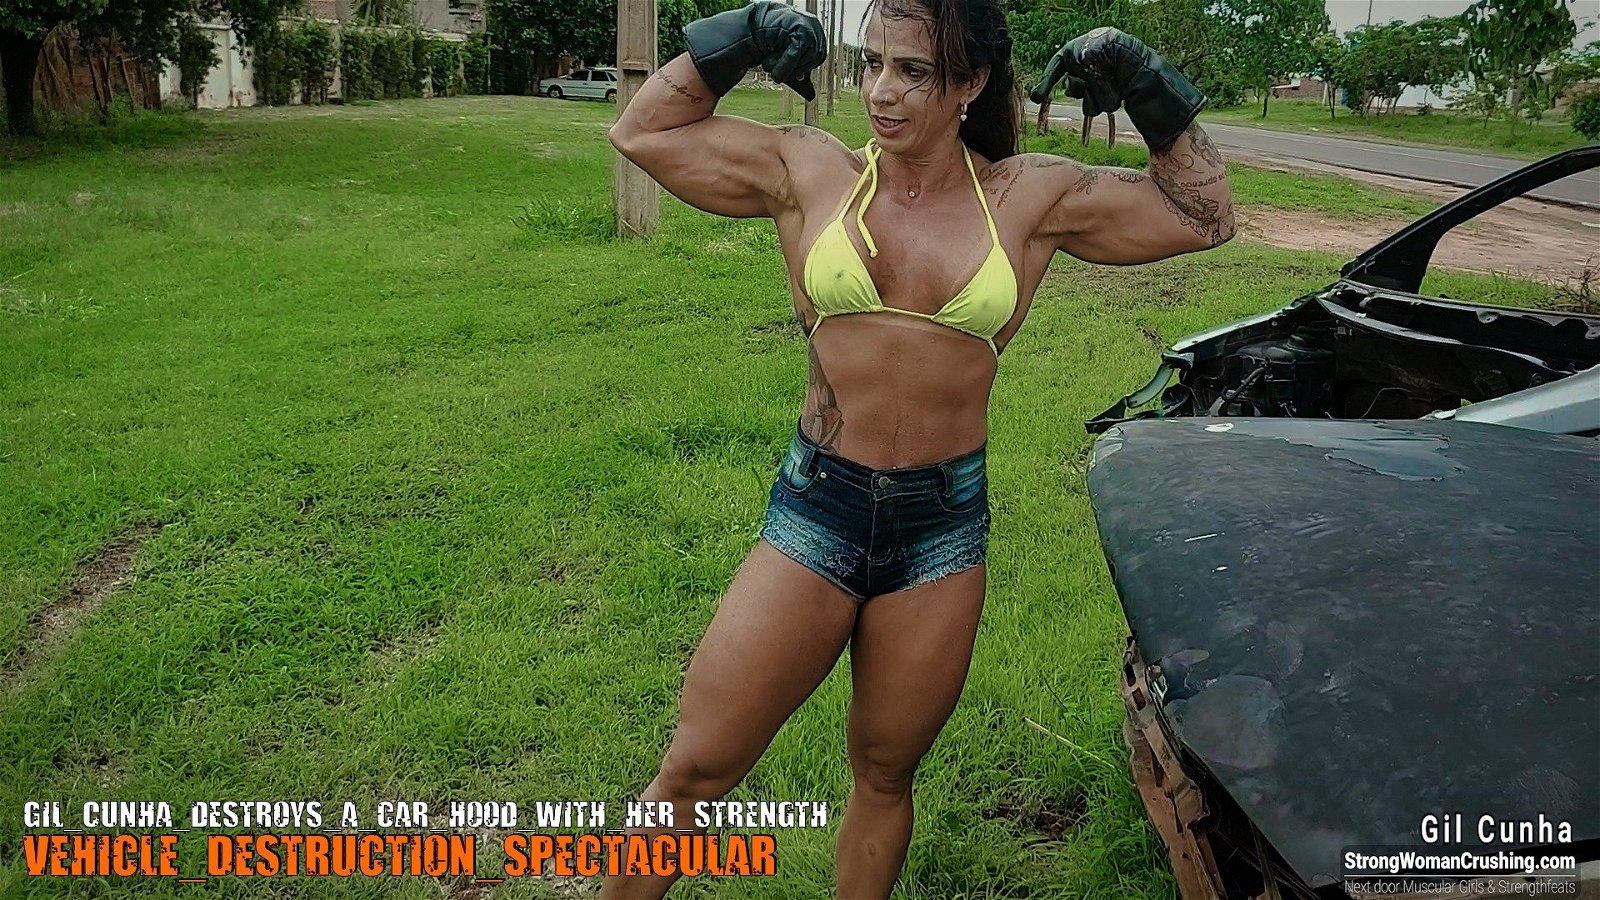 Photo by MusclegirlStrength with the username @MusclegirlStrength, who is a brand user,  September 17, 2023 at 1:02 AM and the text says '💪🔥Check out this incredible video of Gil Cunha destroying a car hood with her strength! 💪🔥Visit www.strongwomancrushing.com to get a membership and watch the video! 🔥 #strongwoman #GilCunha #crushinggoals #carhood #strength'